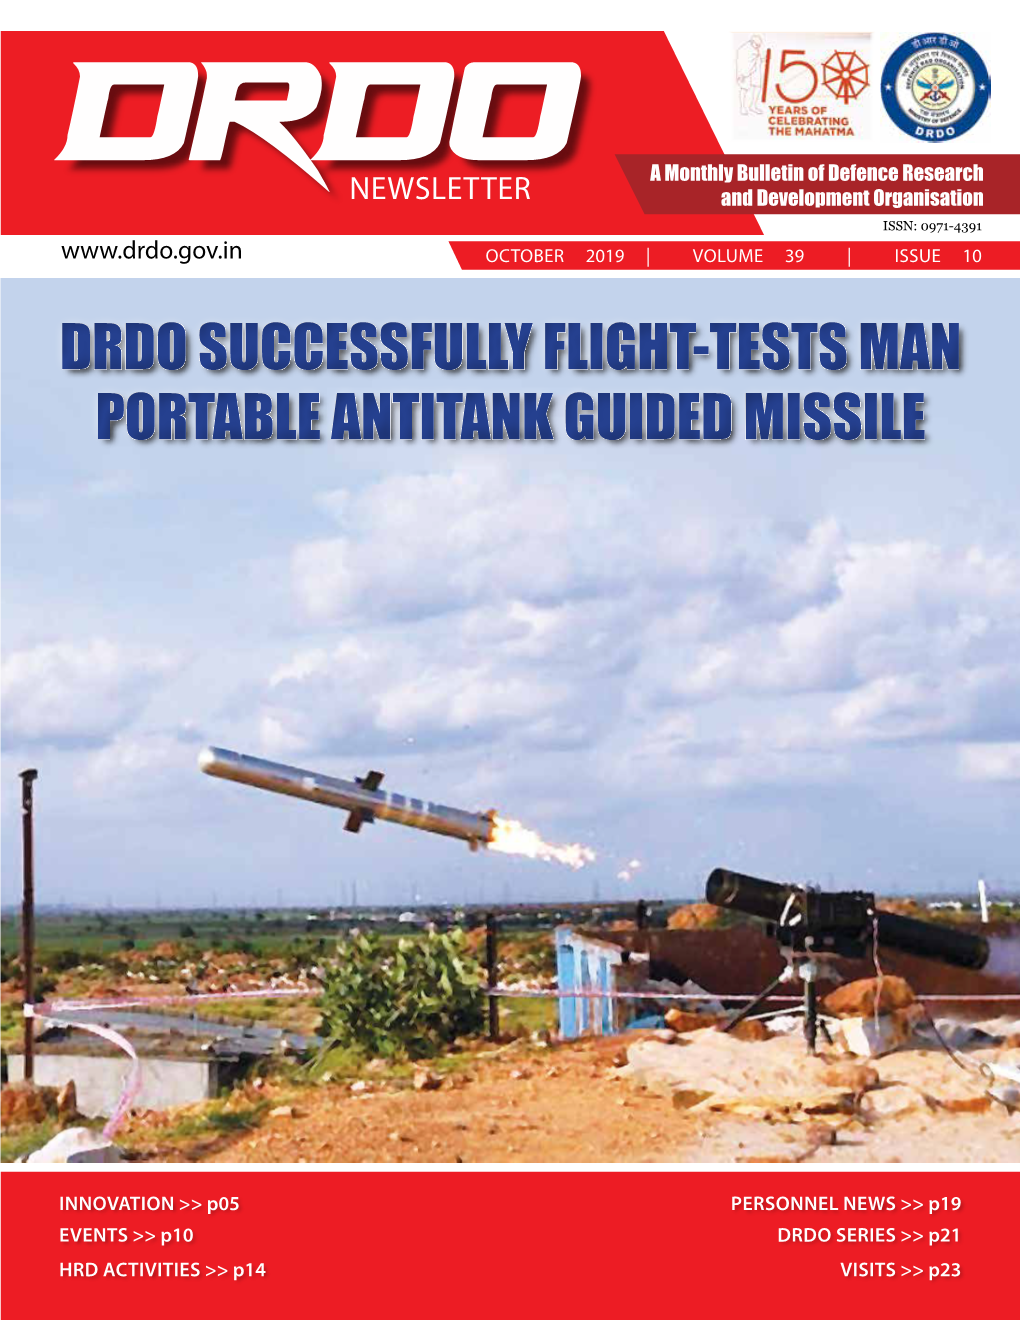 DRDO Successfully Flight-Tests Man Portable Antitank Guided Missile